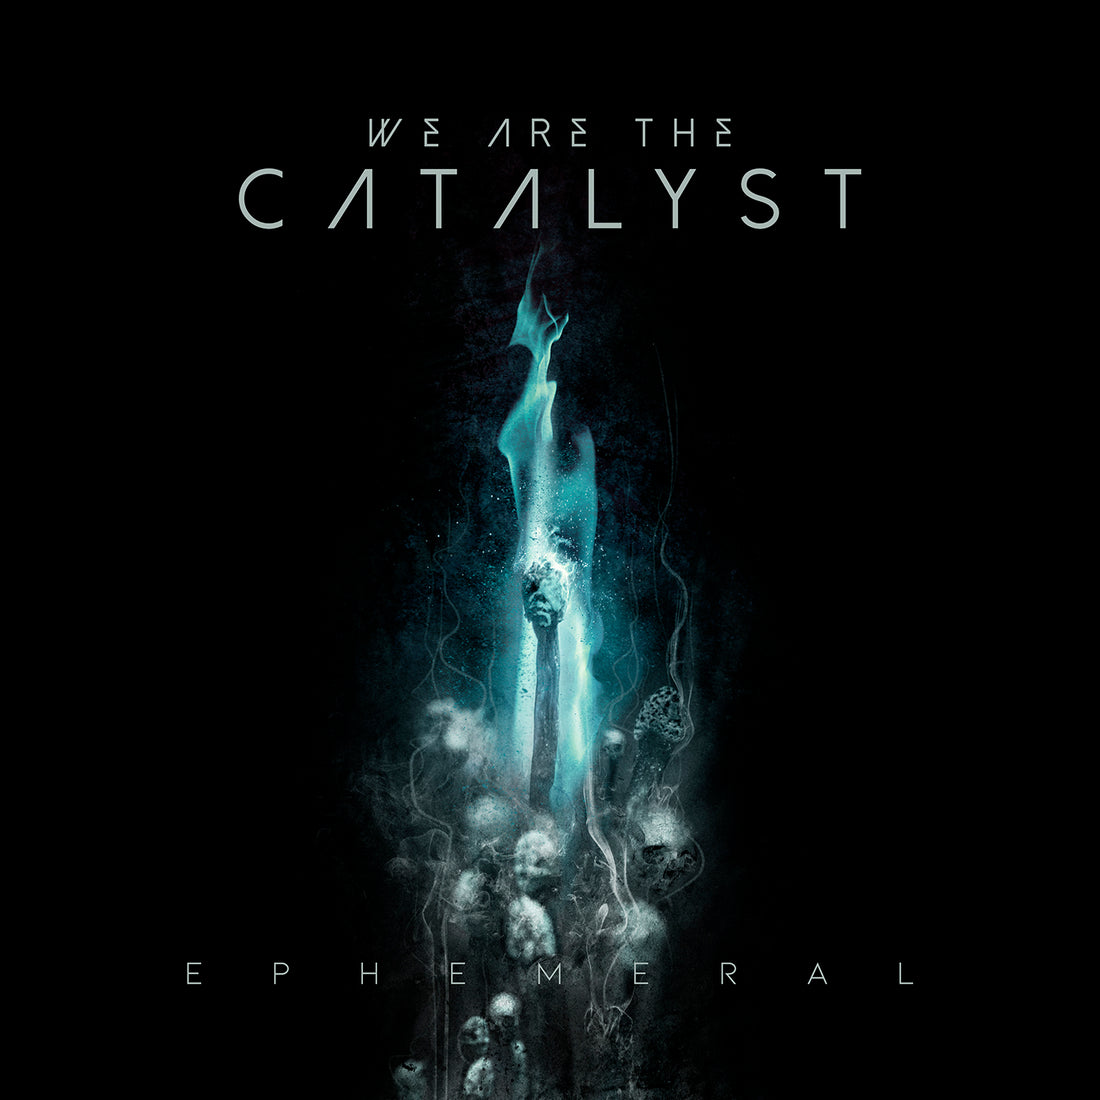 We are the Catalyst